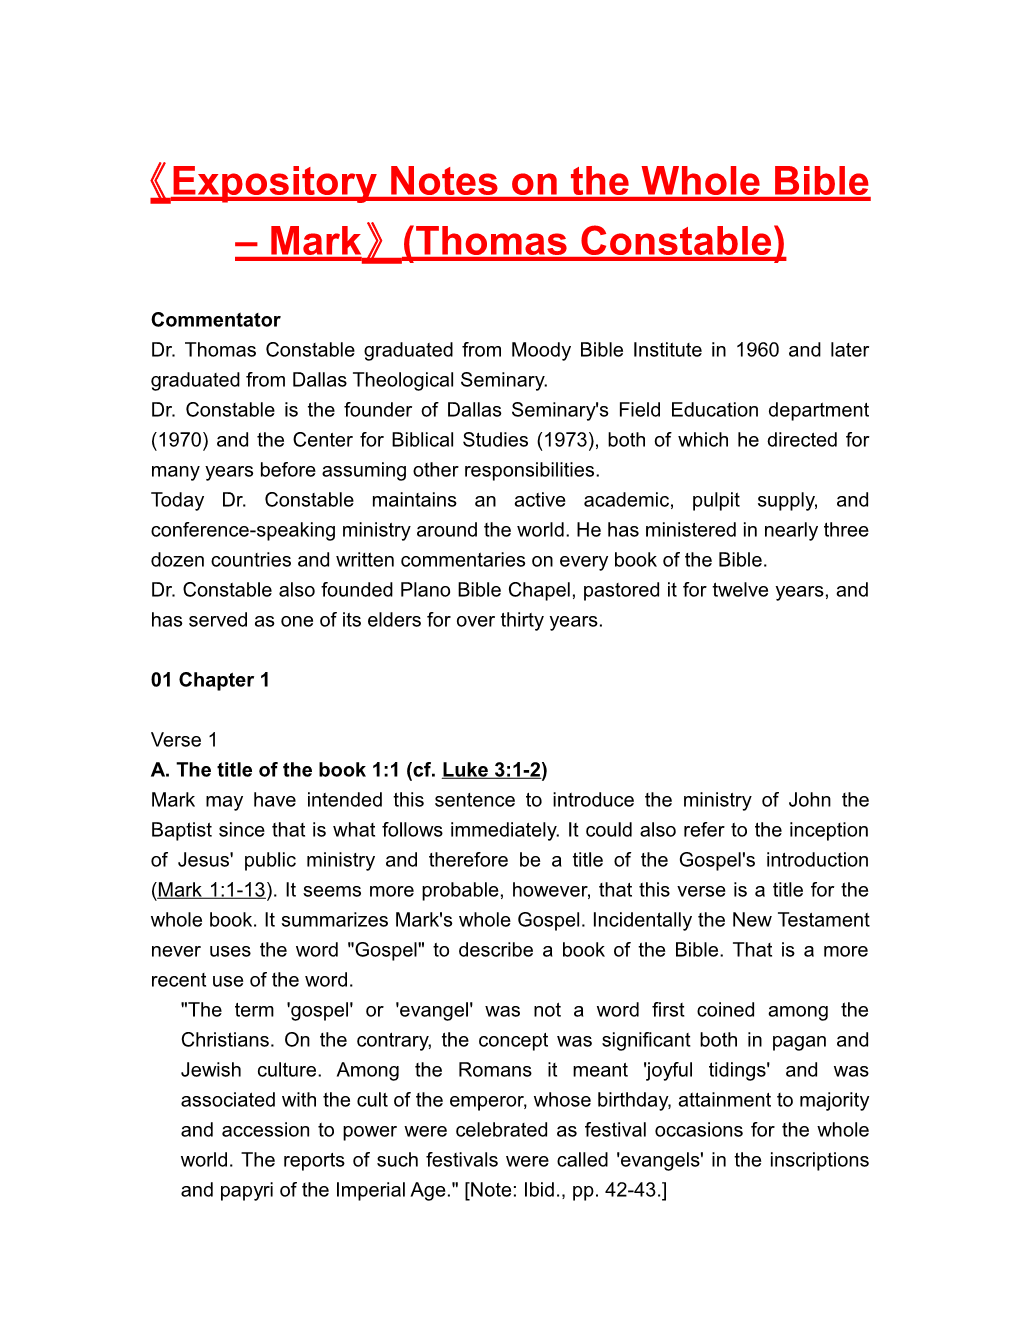 Expositorynotes on the Wholebible Mark (Thomas Constable)